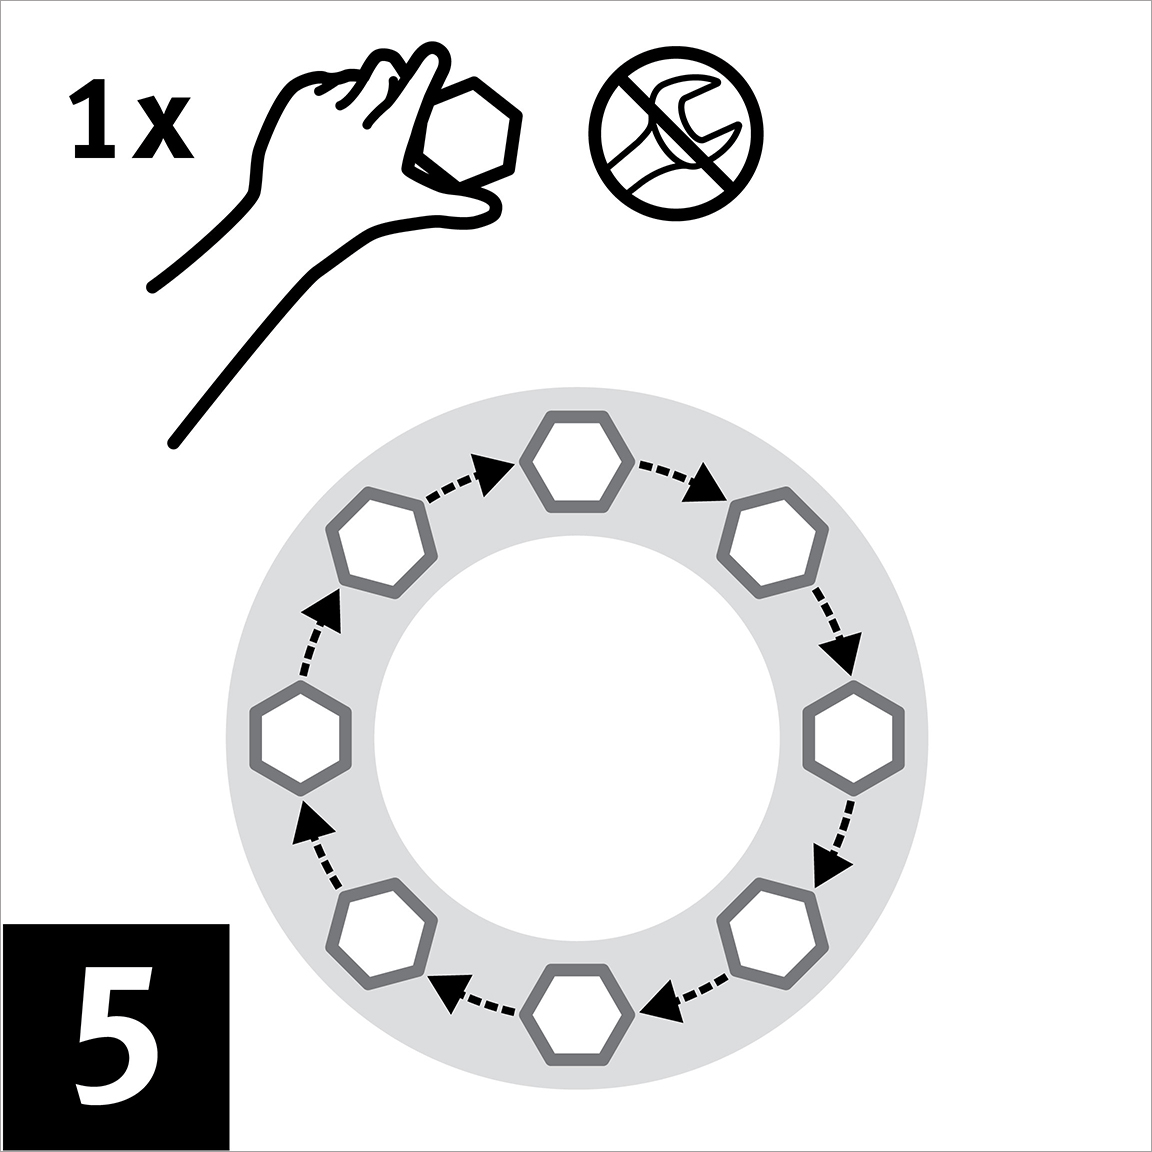 Finger-tighten the bolts, moving in a circular direction.